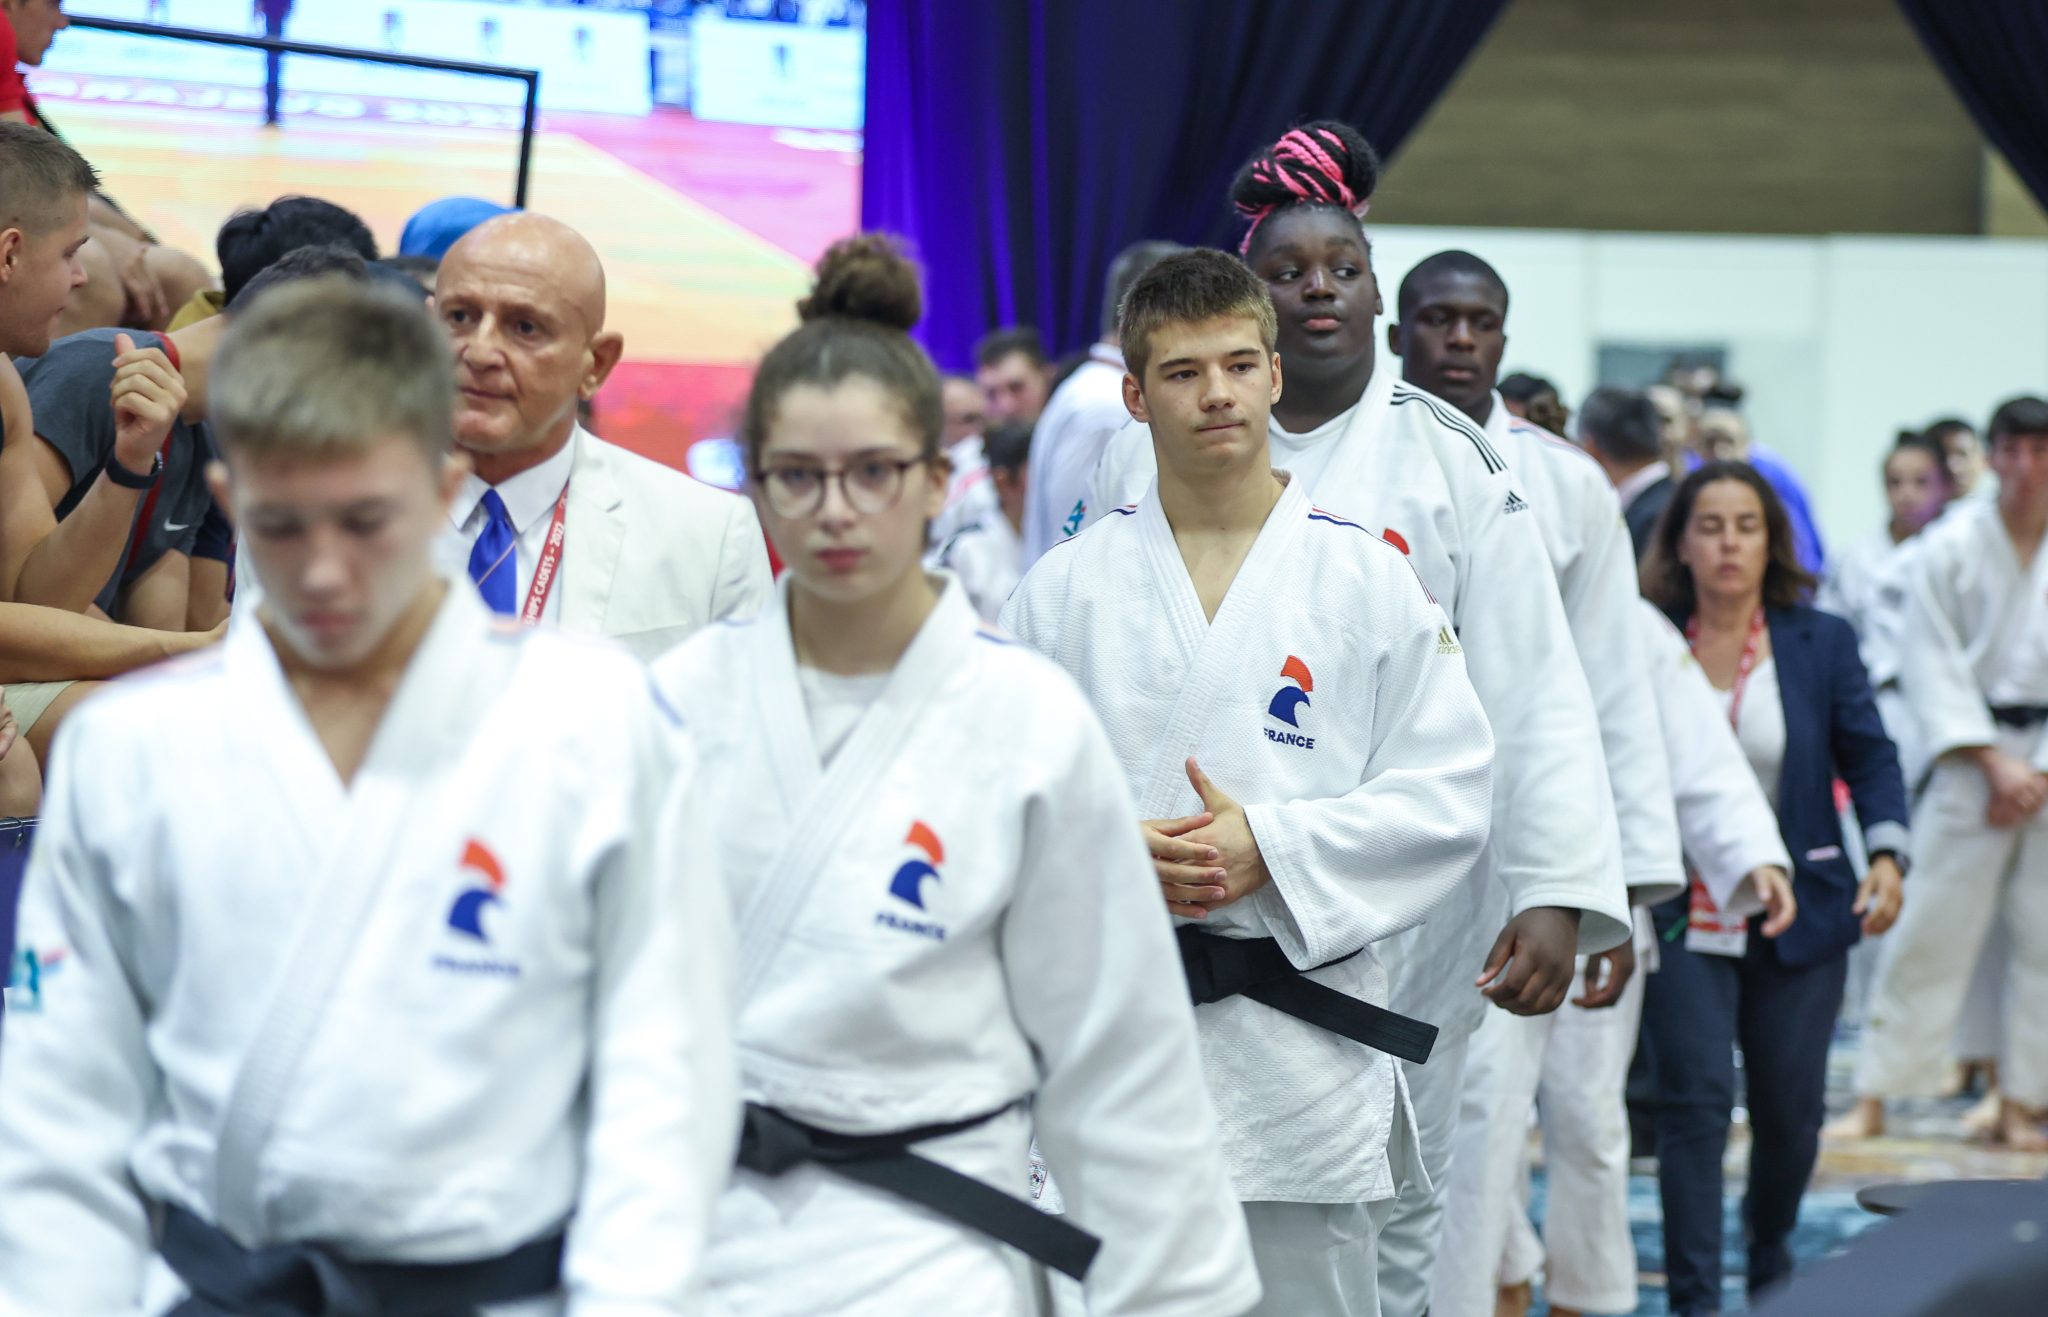 AZERBAIJAN TAKE ON FRANCE FOR CADET MIXED TEAM WORLD TITLE